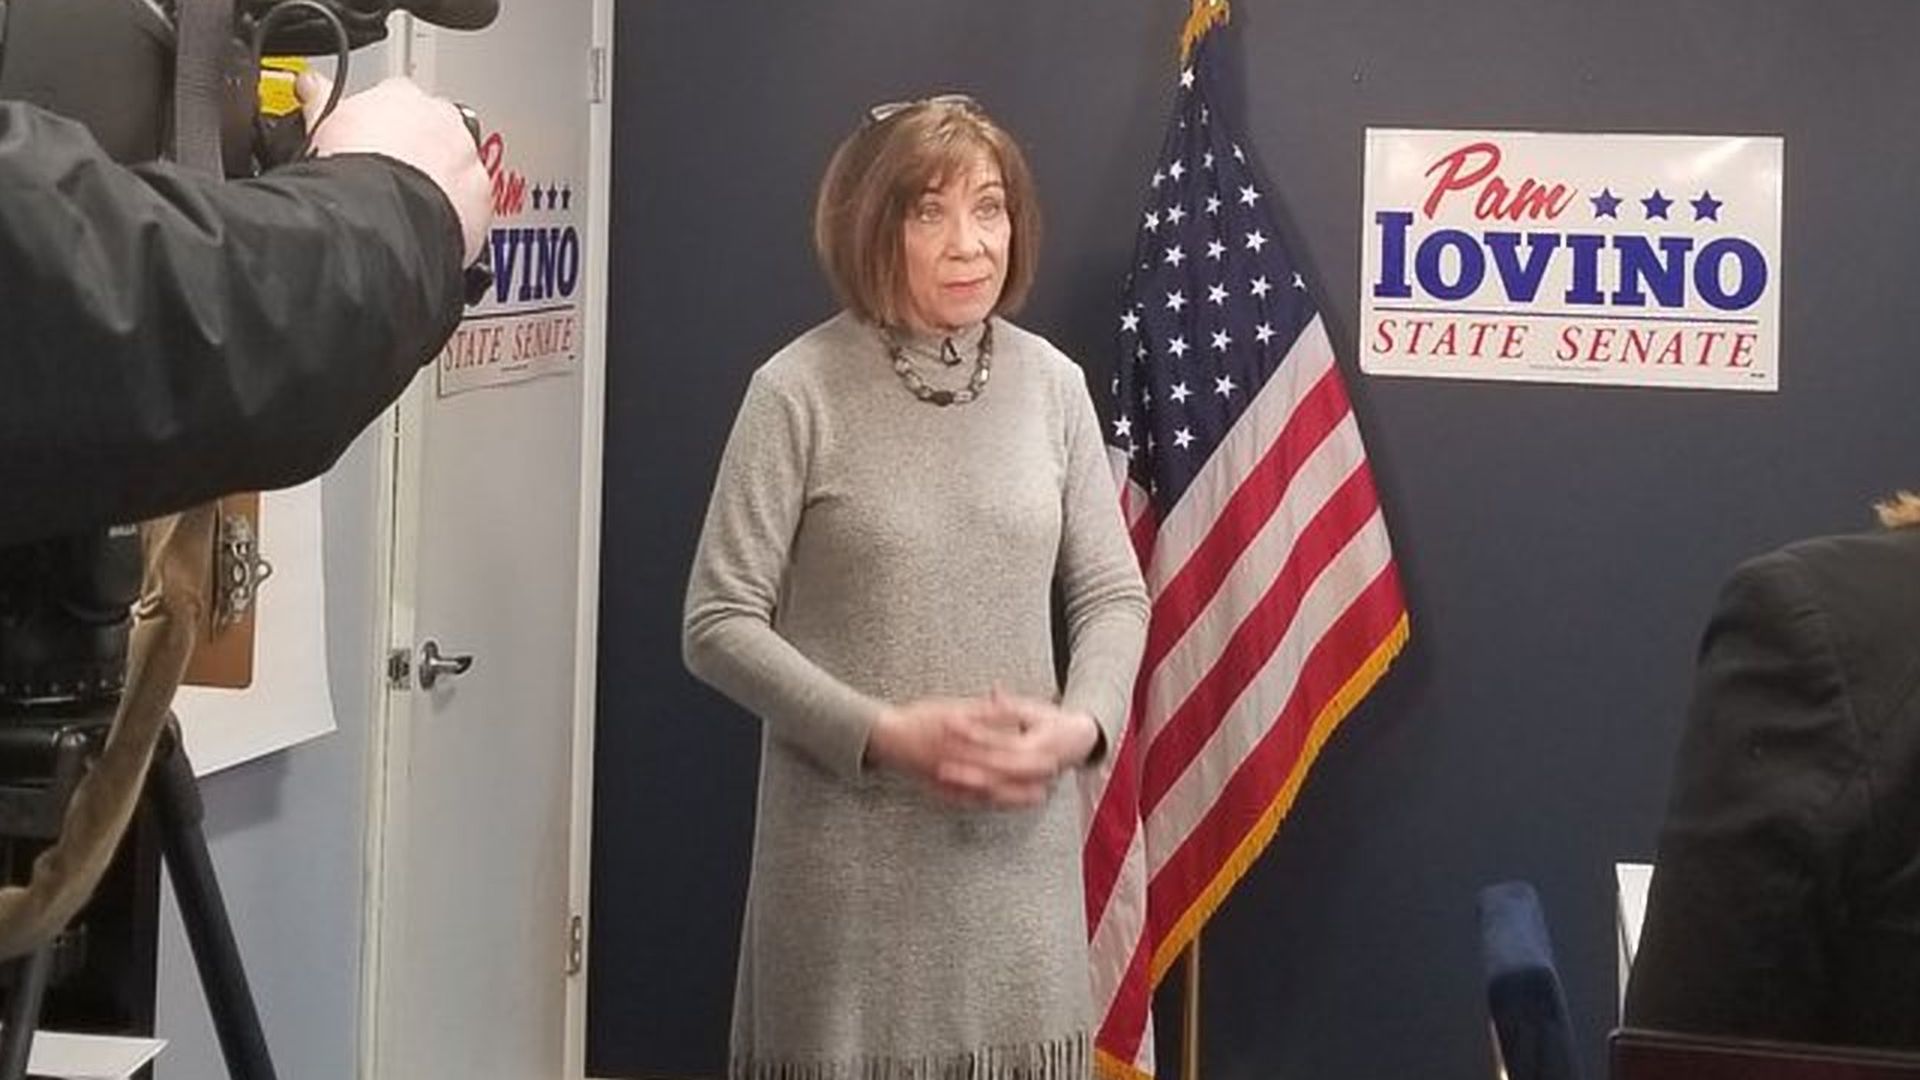 Democratic Navy veteran Pam Iovino won a special election to fill a state Senate district in suburban Pittsburgh, a district President Trump won in 2016.